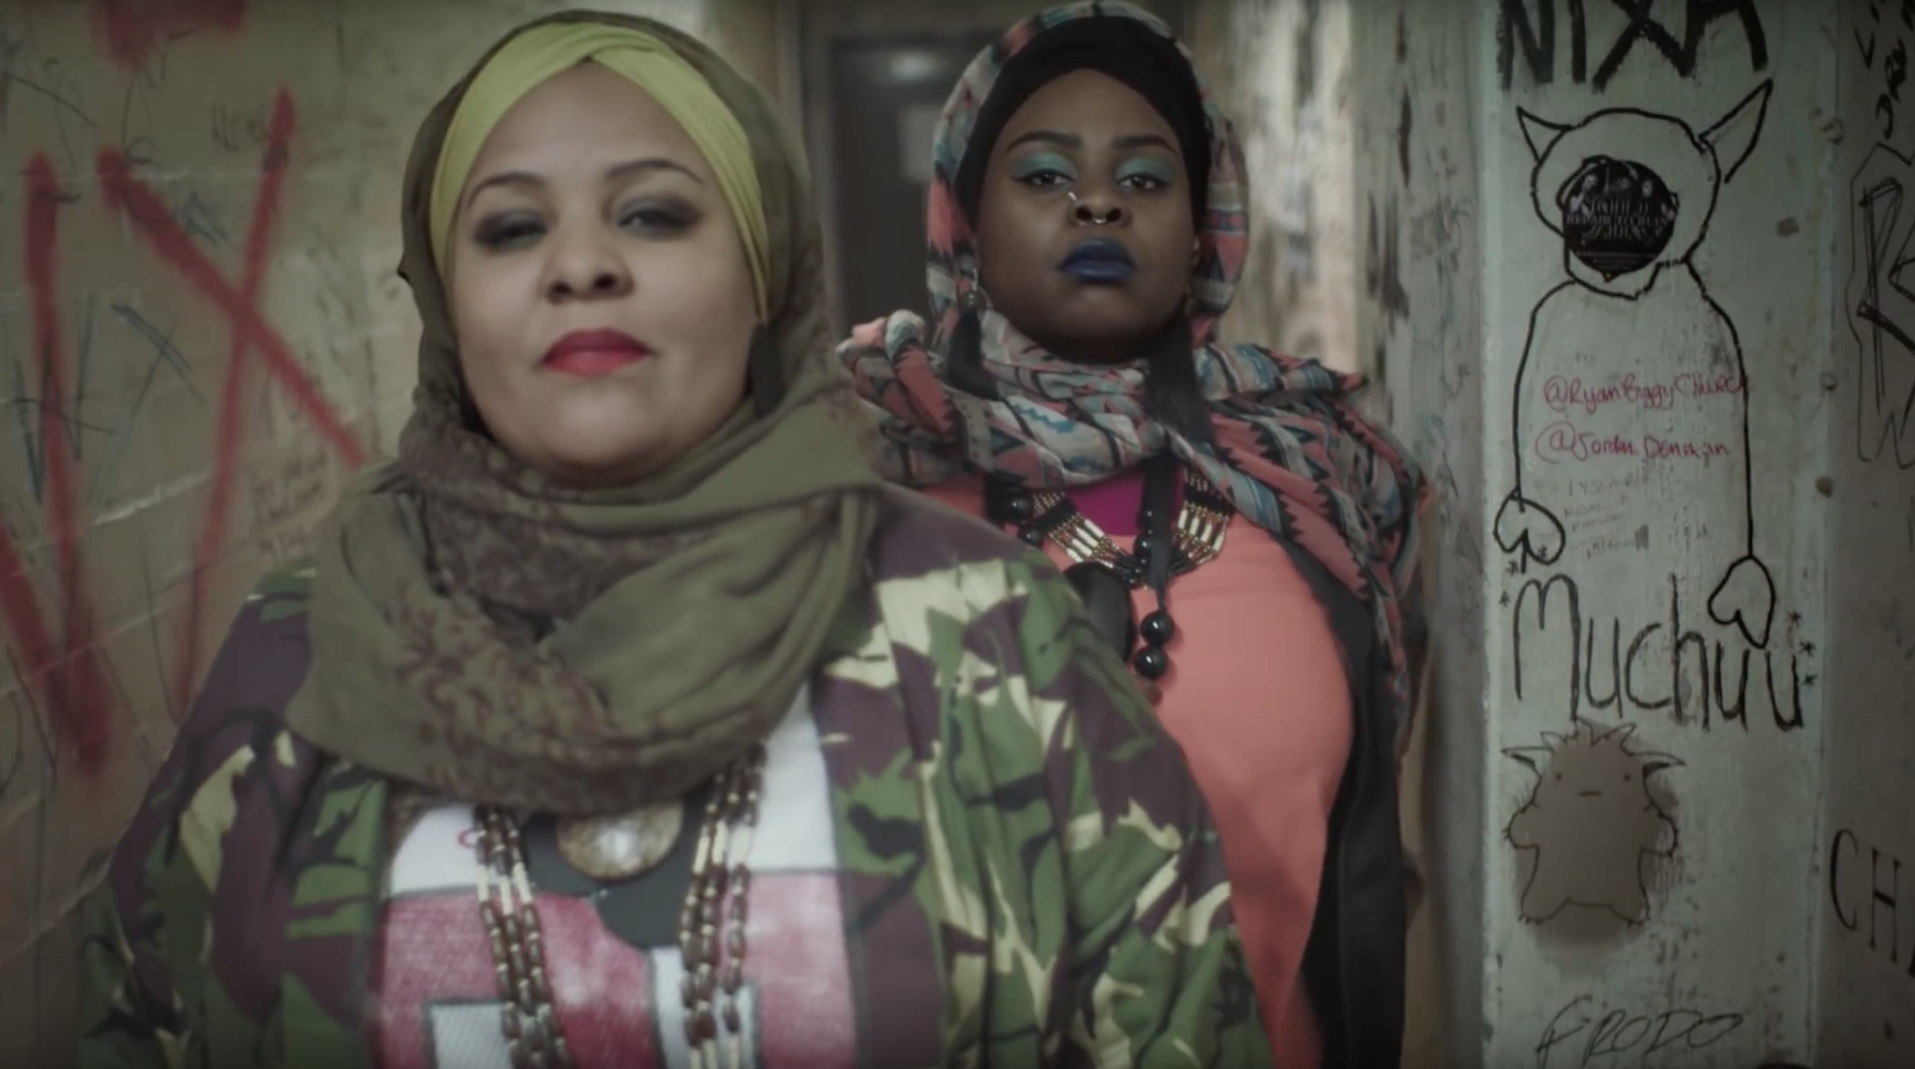 Muslim Hip Hop Duo Take the Stage in CHI&Partners' New iD Film